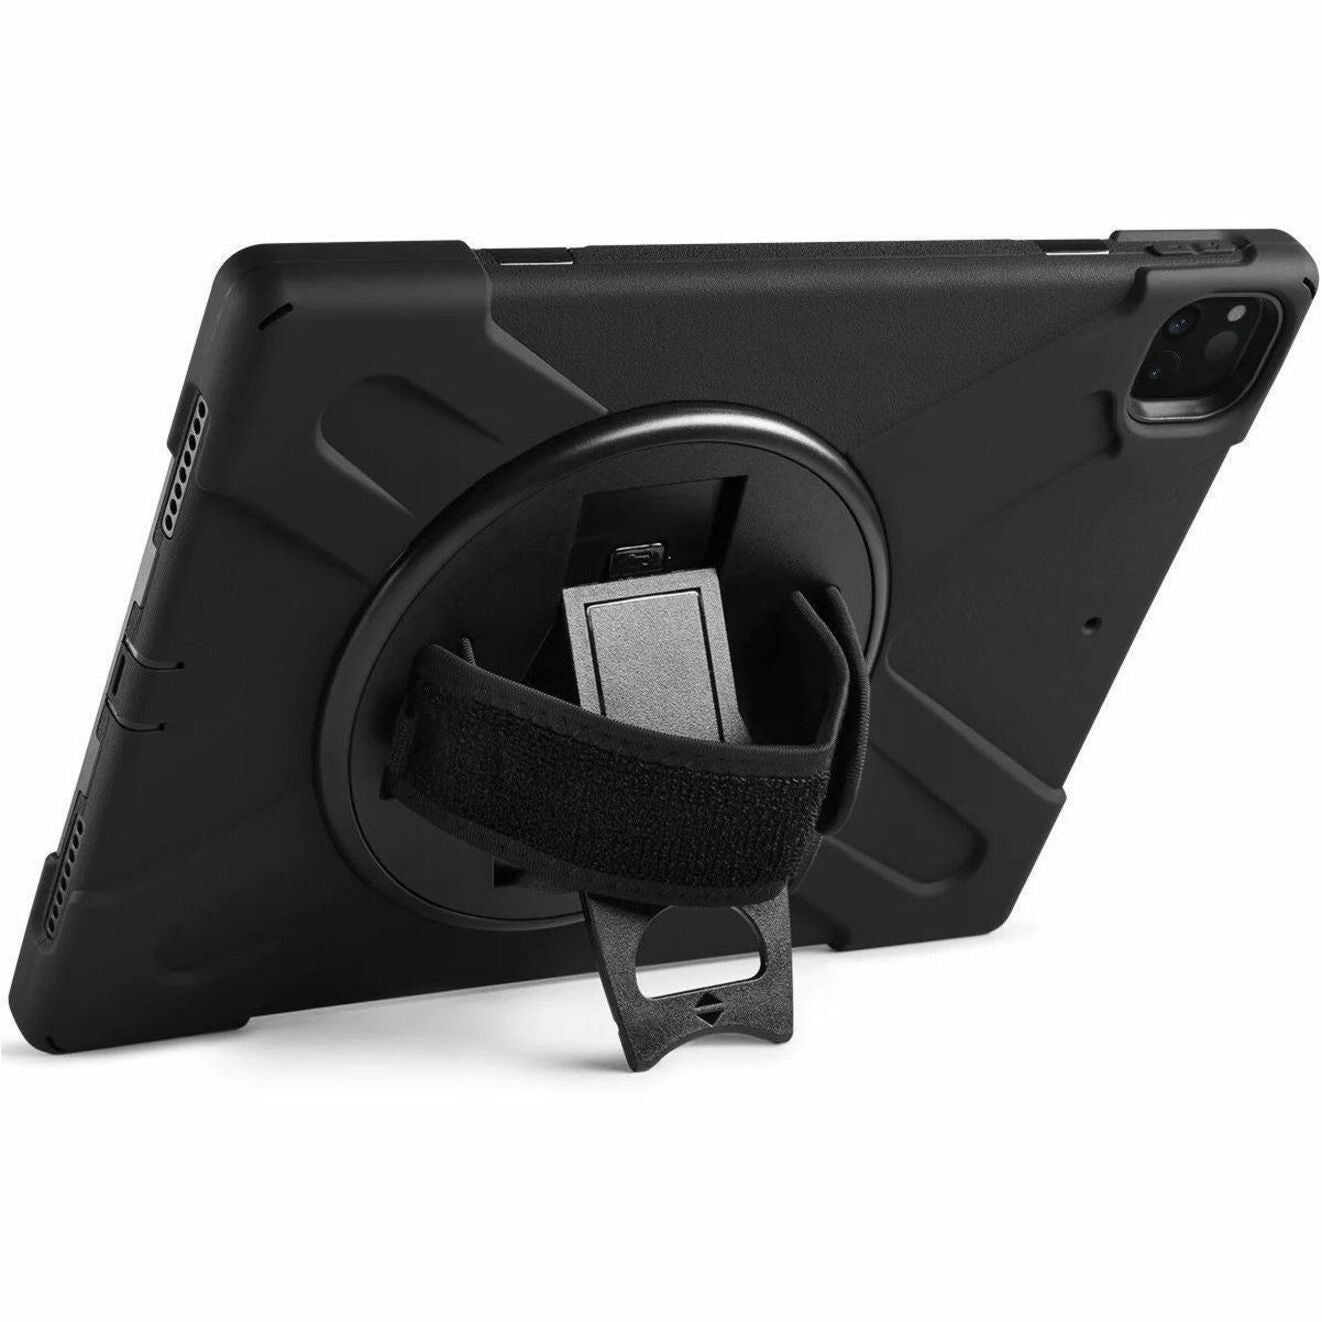 Cellairis Rapture Rugged Carrying Case for 12.9" Apple iPad Pro (5th Generation), iPad Pro (6th Generation) iPad Pro (02-0440001)